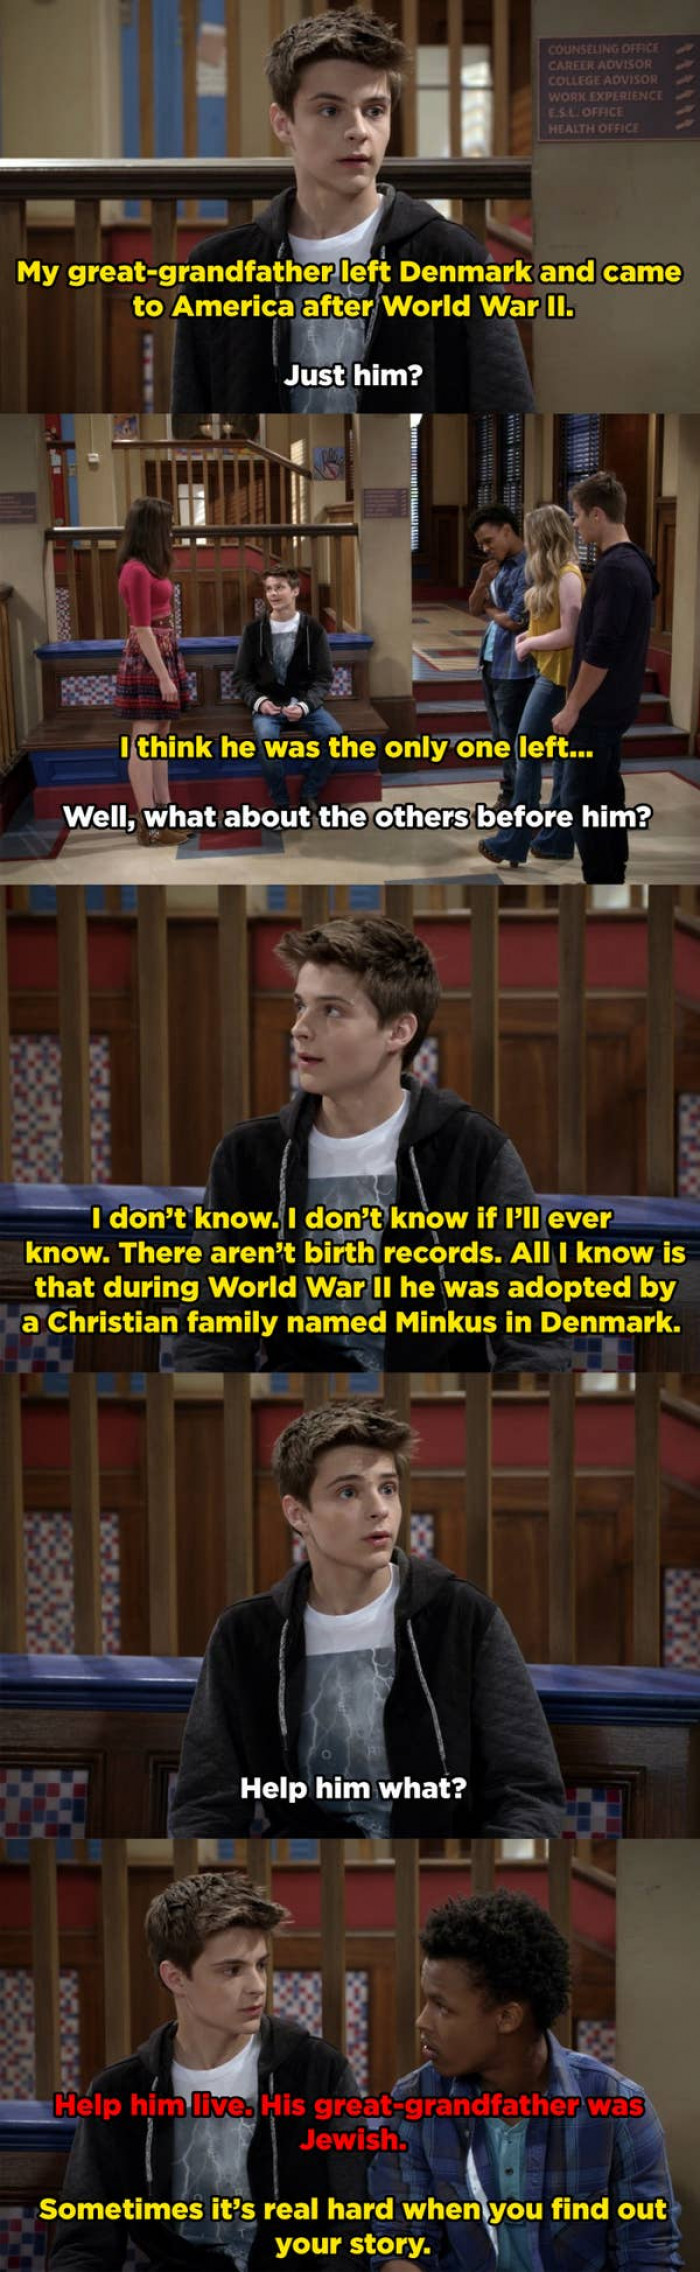 3. Girl Meets World: Farkle learns that his biological family members perished during the Holocaust. In addition, his great-grandfather was an adopted child of the Minkus's.